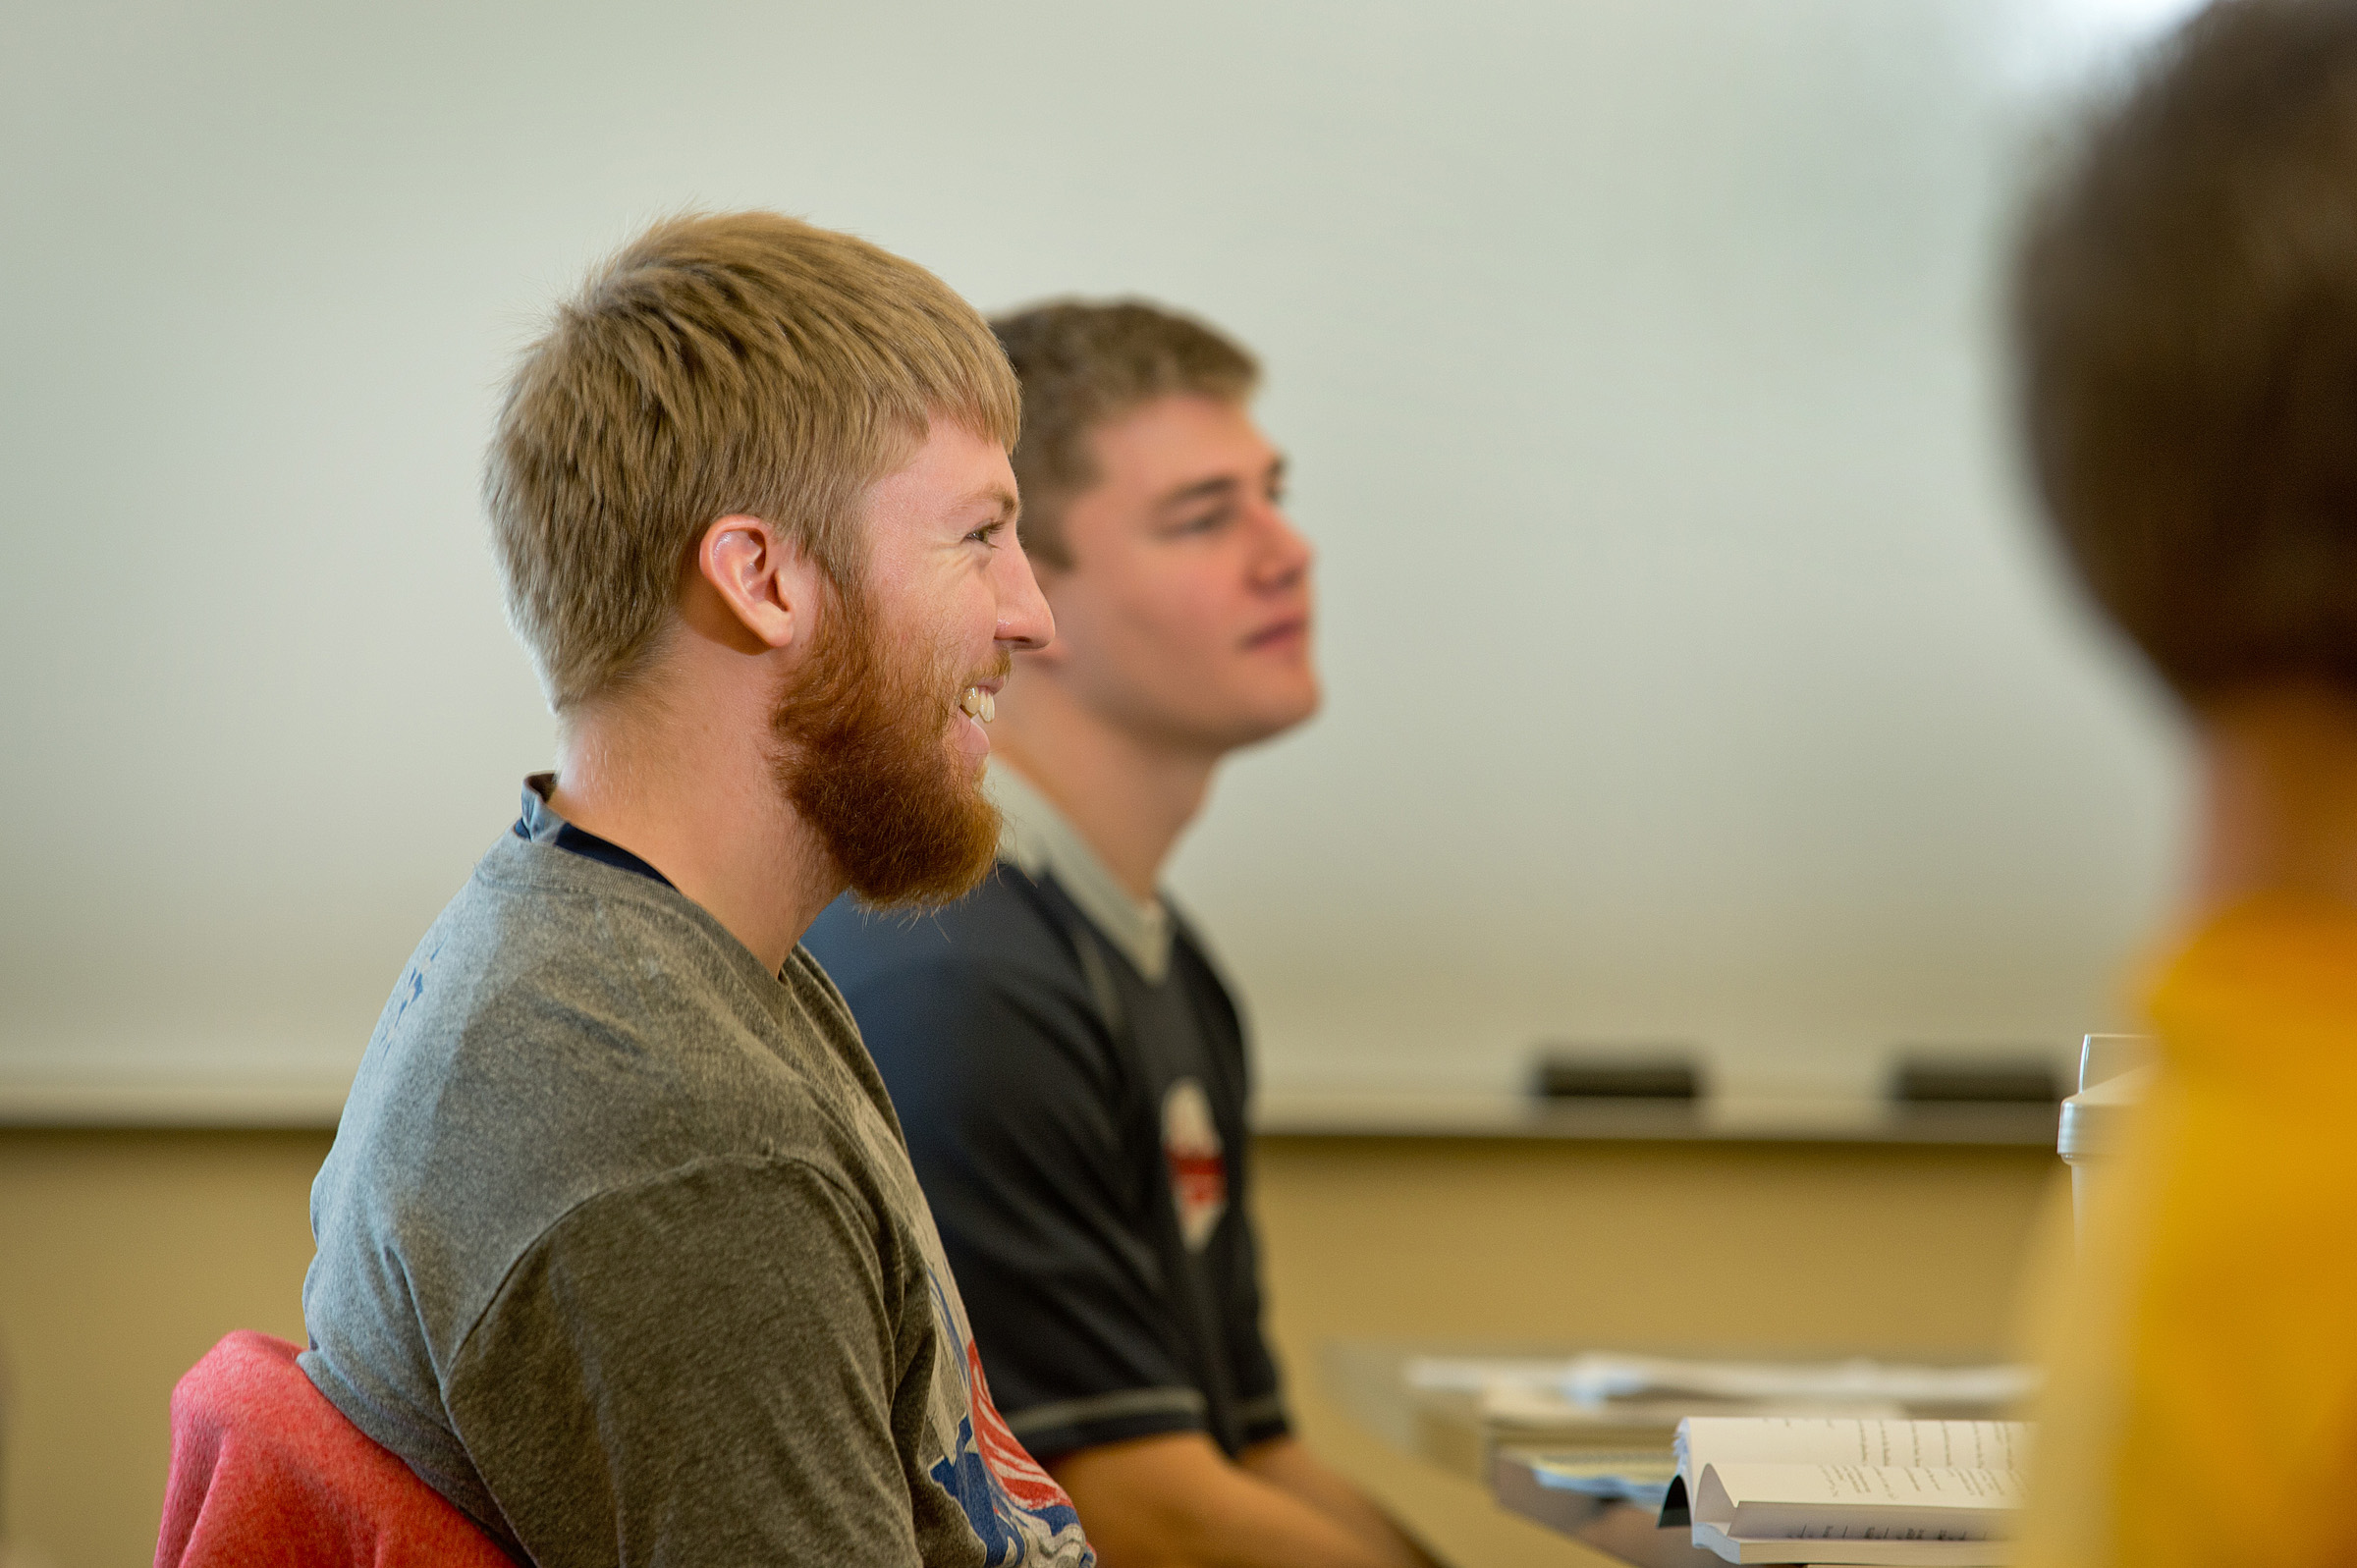 Students listening in class in front of a whiteboard